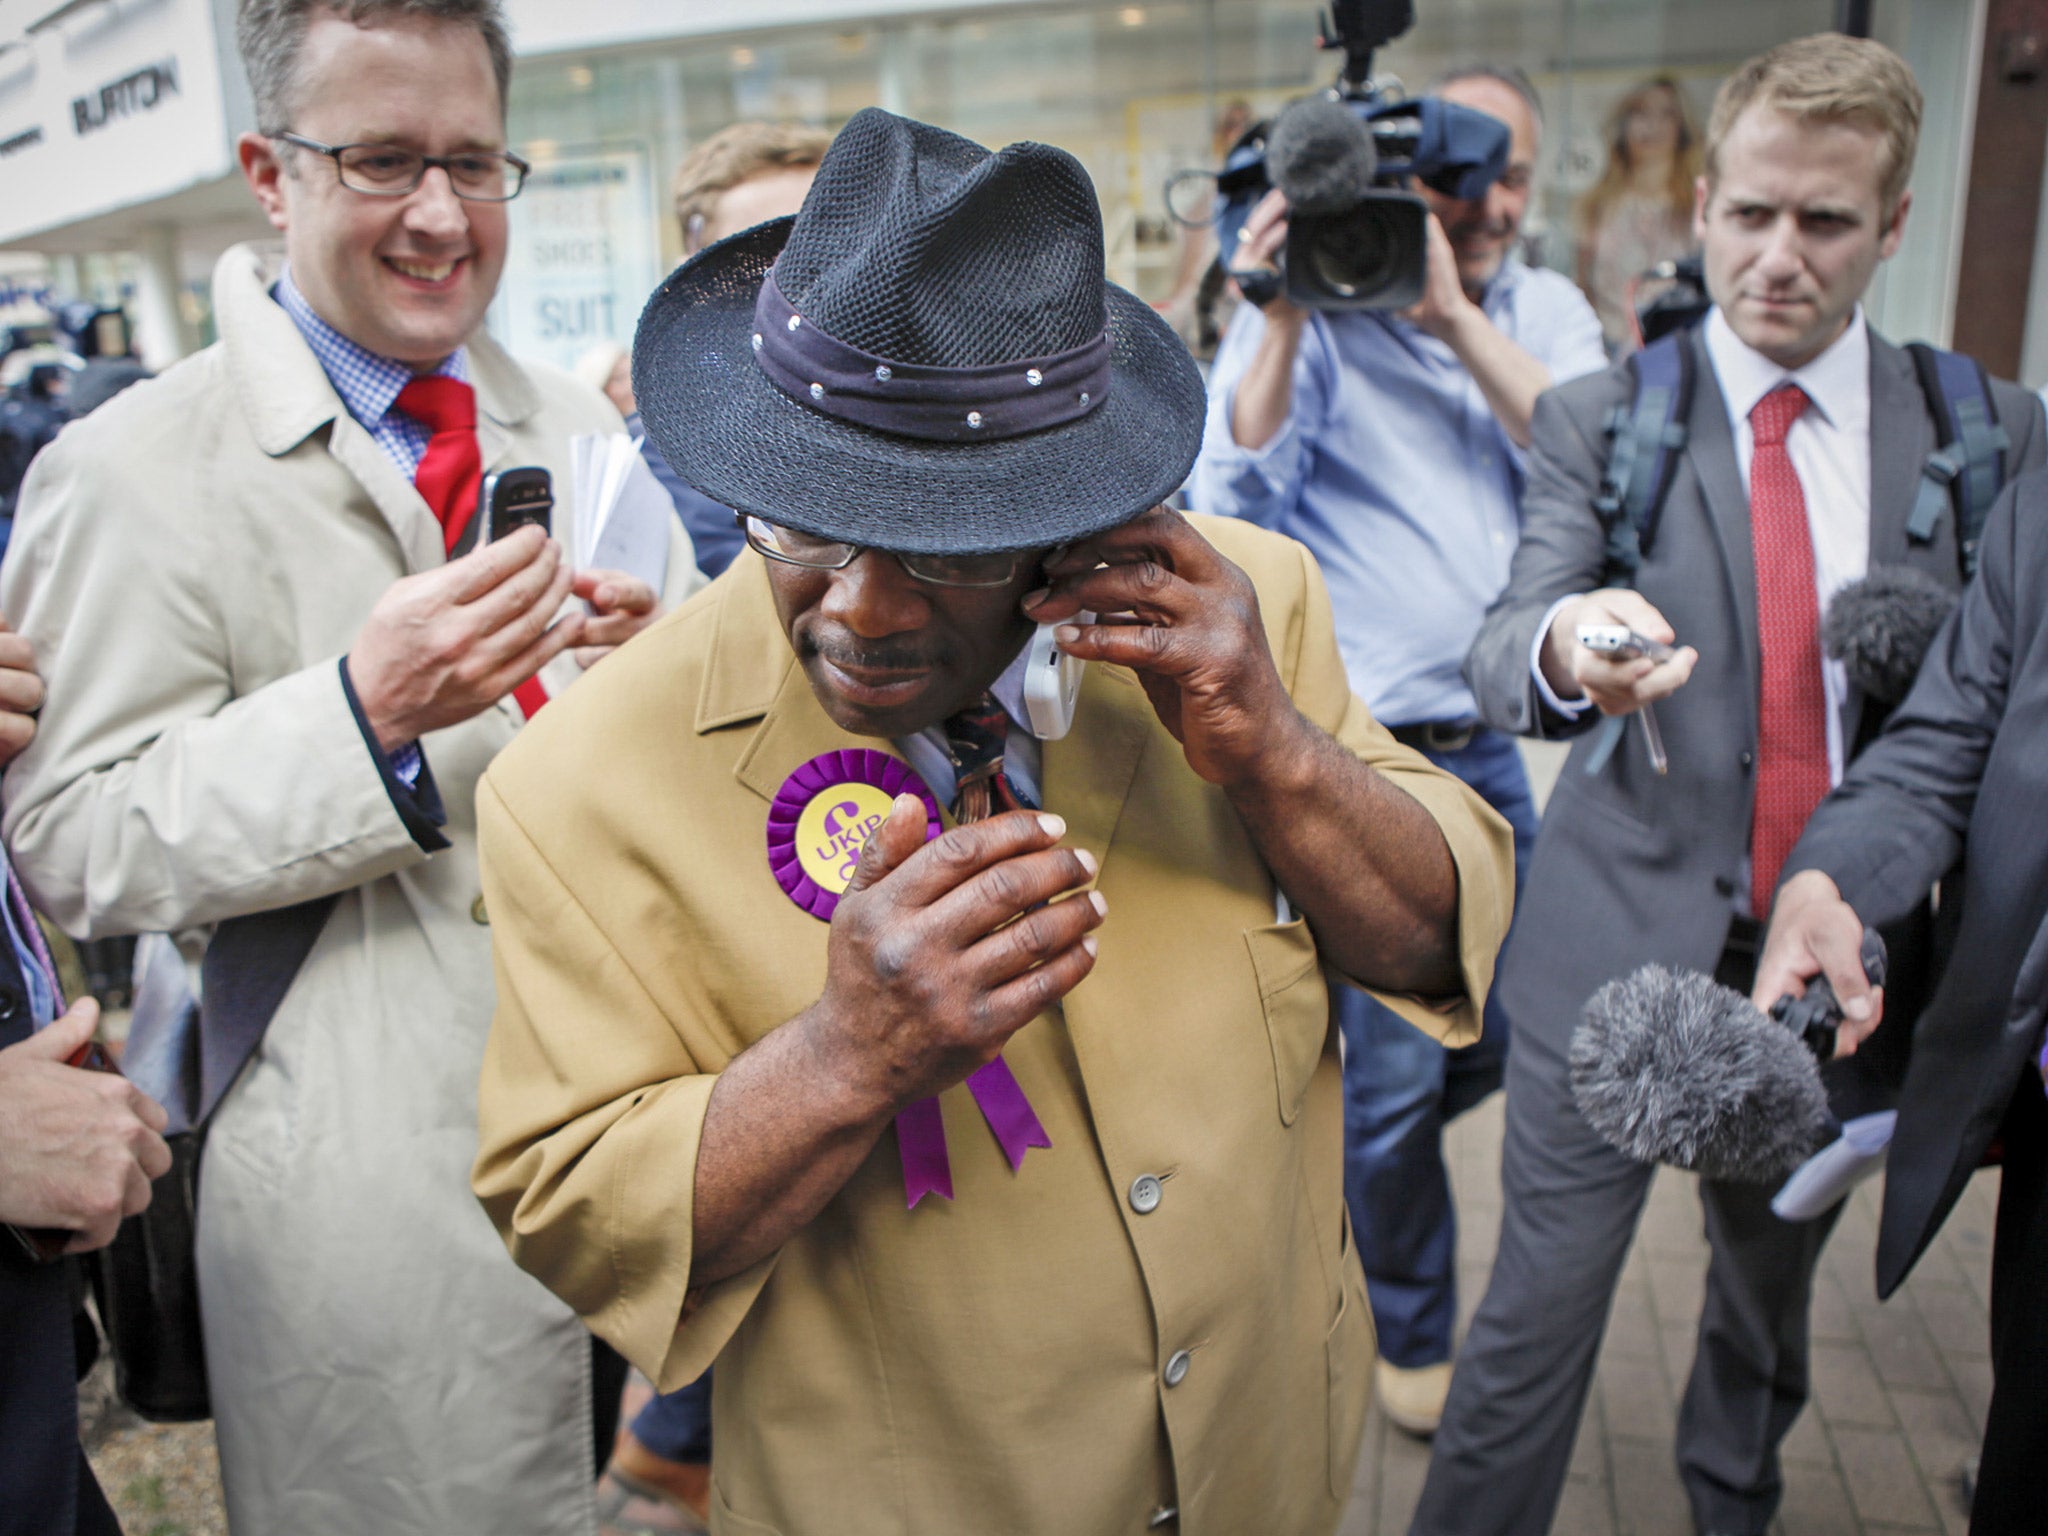 Ukip candidate Winston Mackenzie takes a call regarding the whereabouts of leader Nigel Farage in Croydon